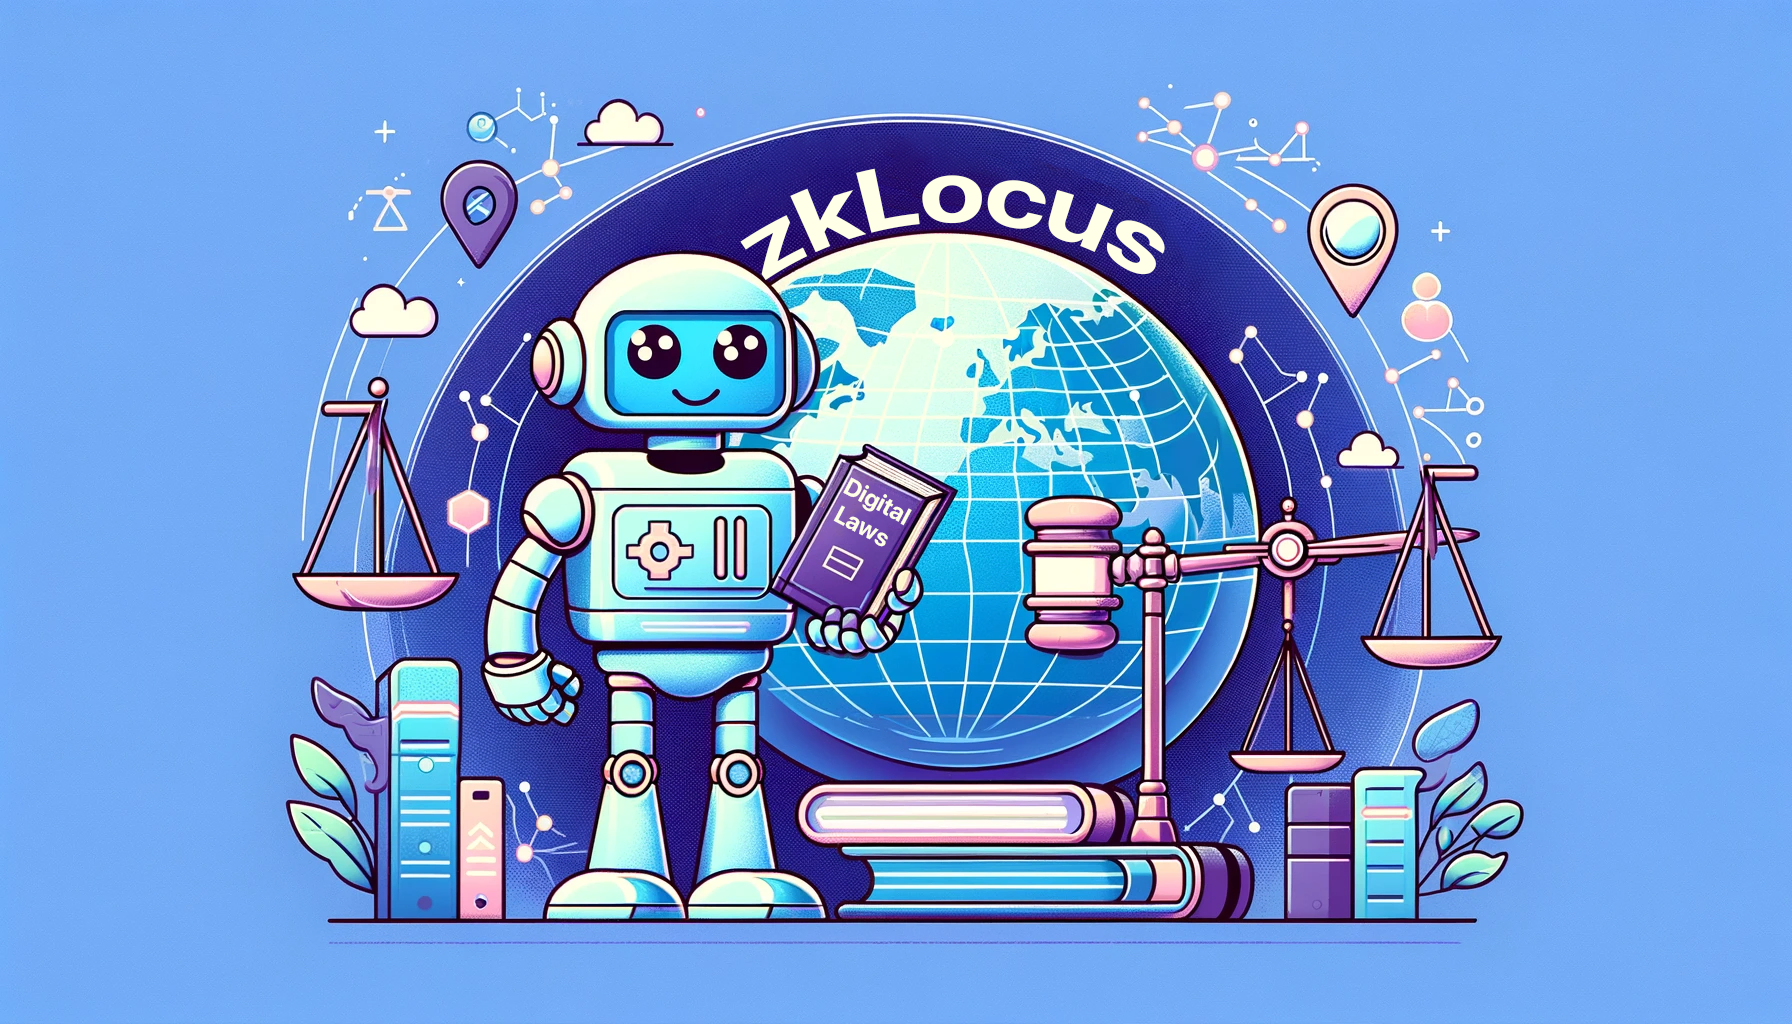 zkLocus in digital law, enforceable by smart contracts, and generation of legal assertions regarind geoloation